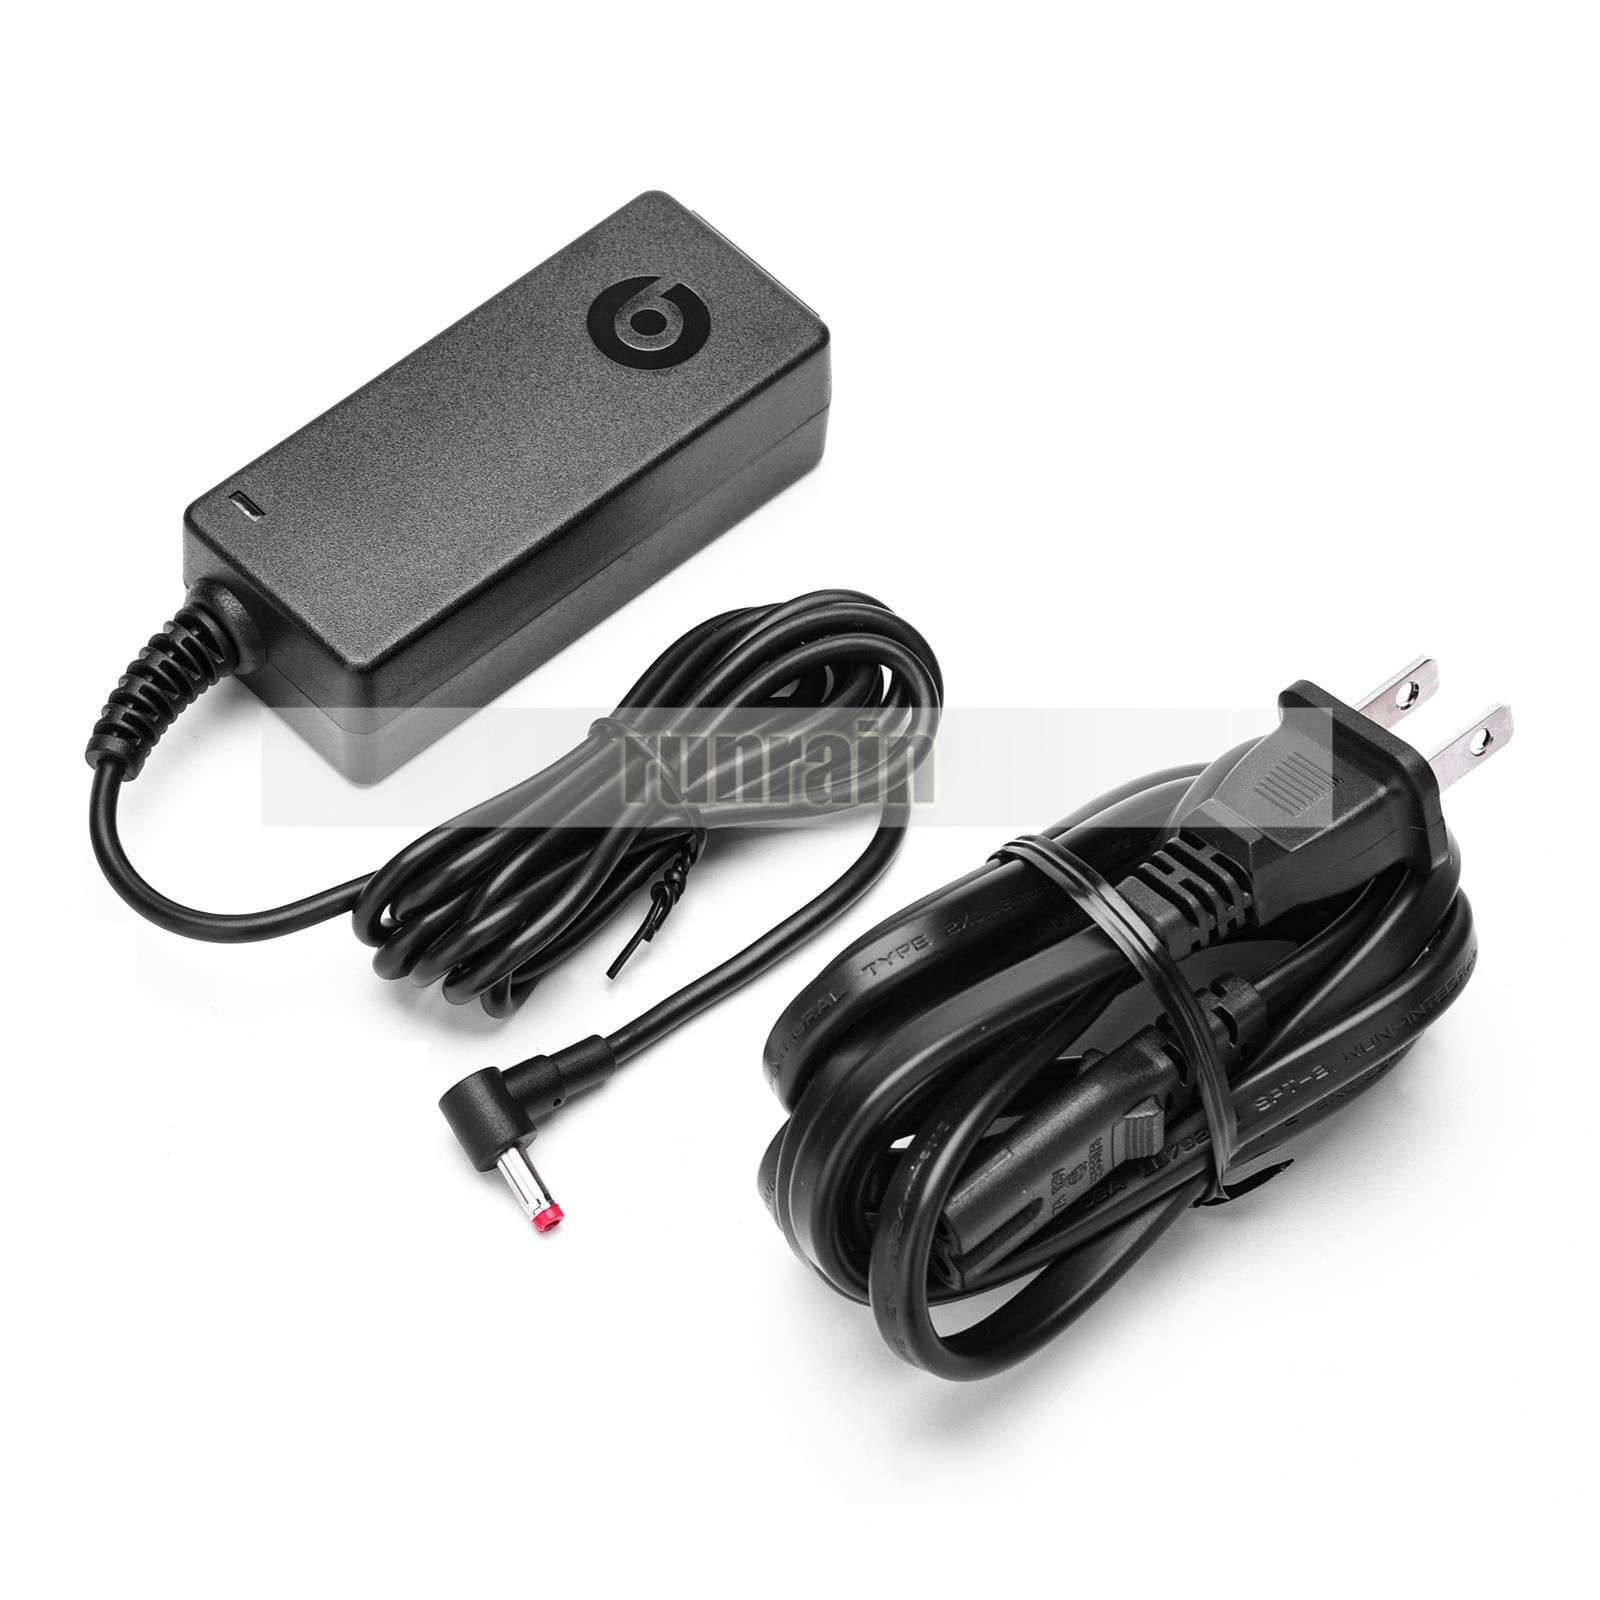 Original Beats Pill XL 12V 3A AC Adapter Power Charger B0514 DYS404-120300W Brand Color Black Compatible Model For Be